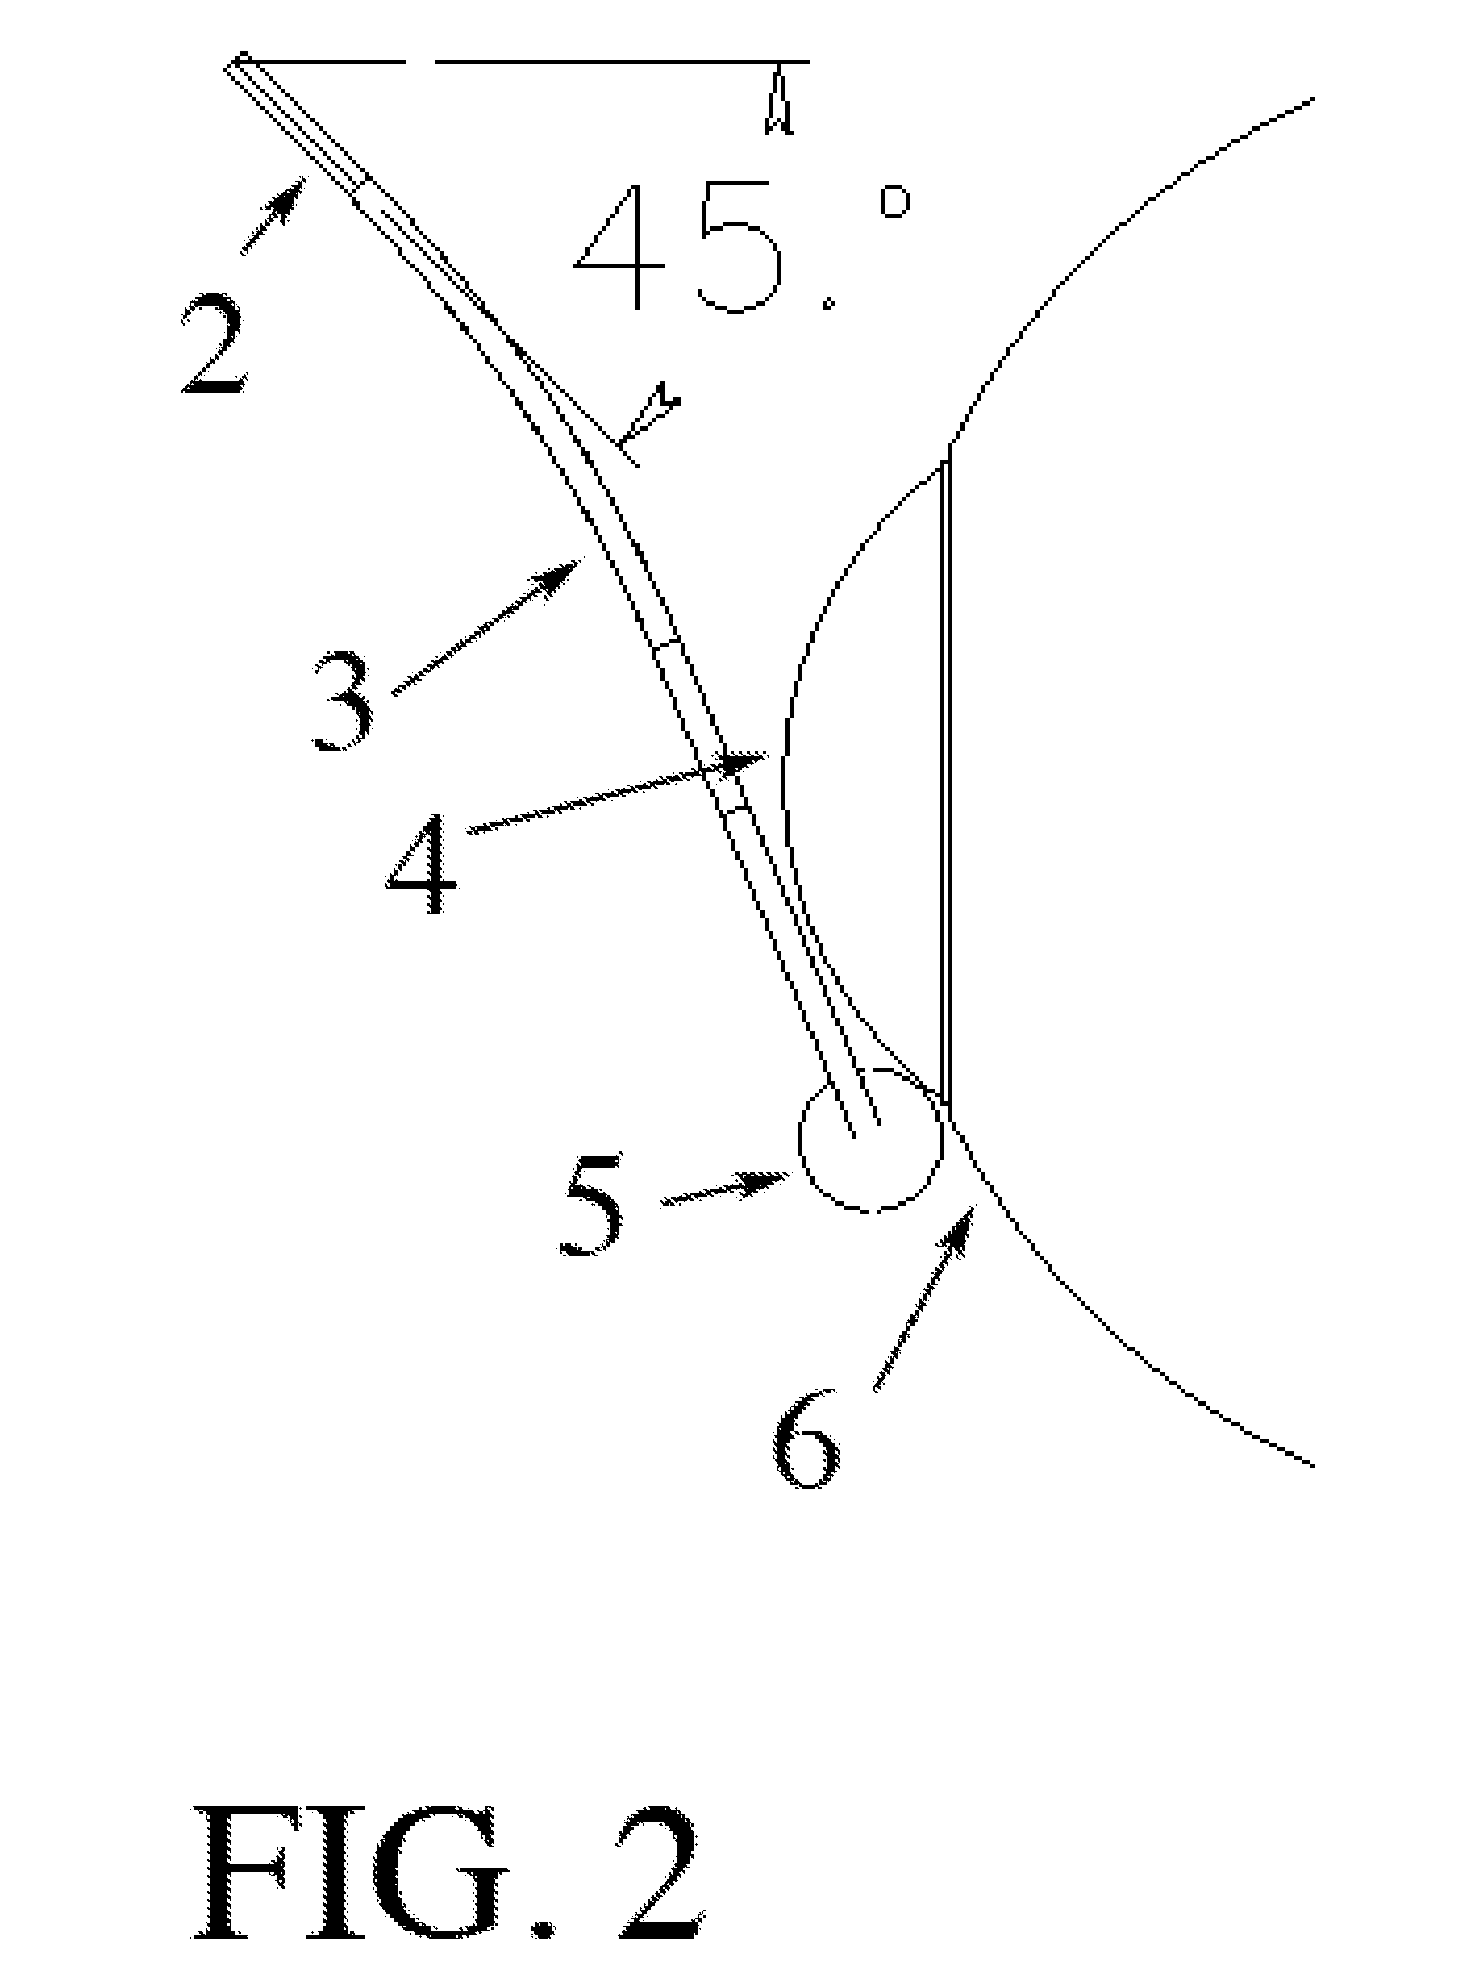 Electrode for Electroretinographic Use and Method of Application